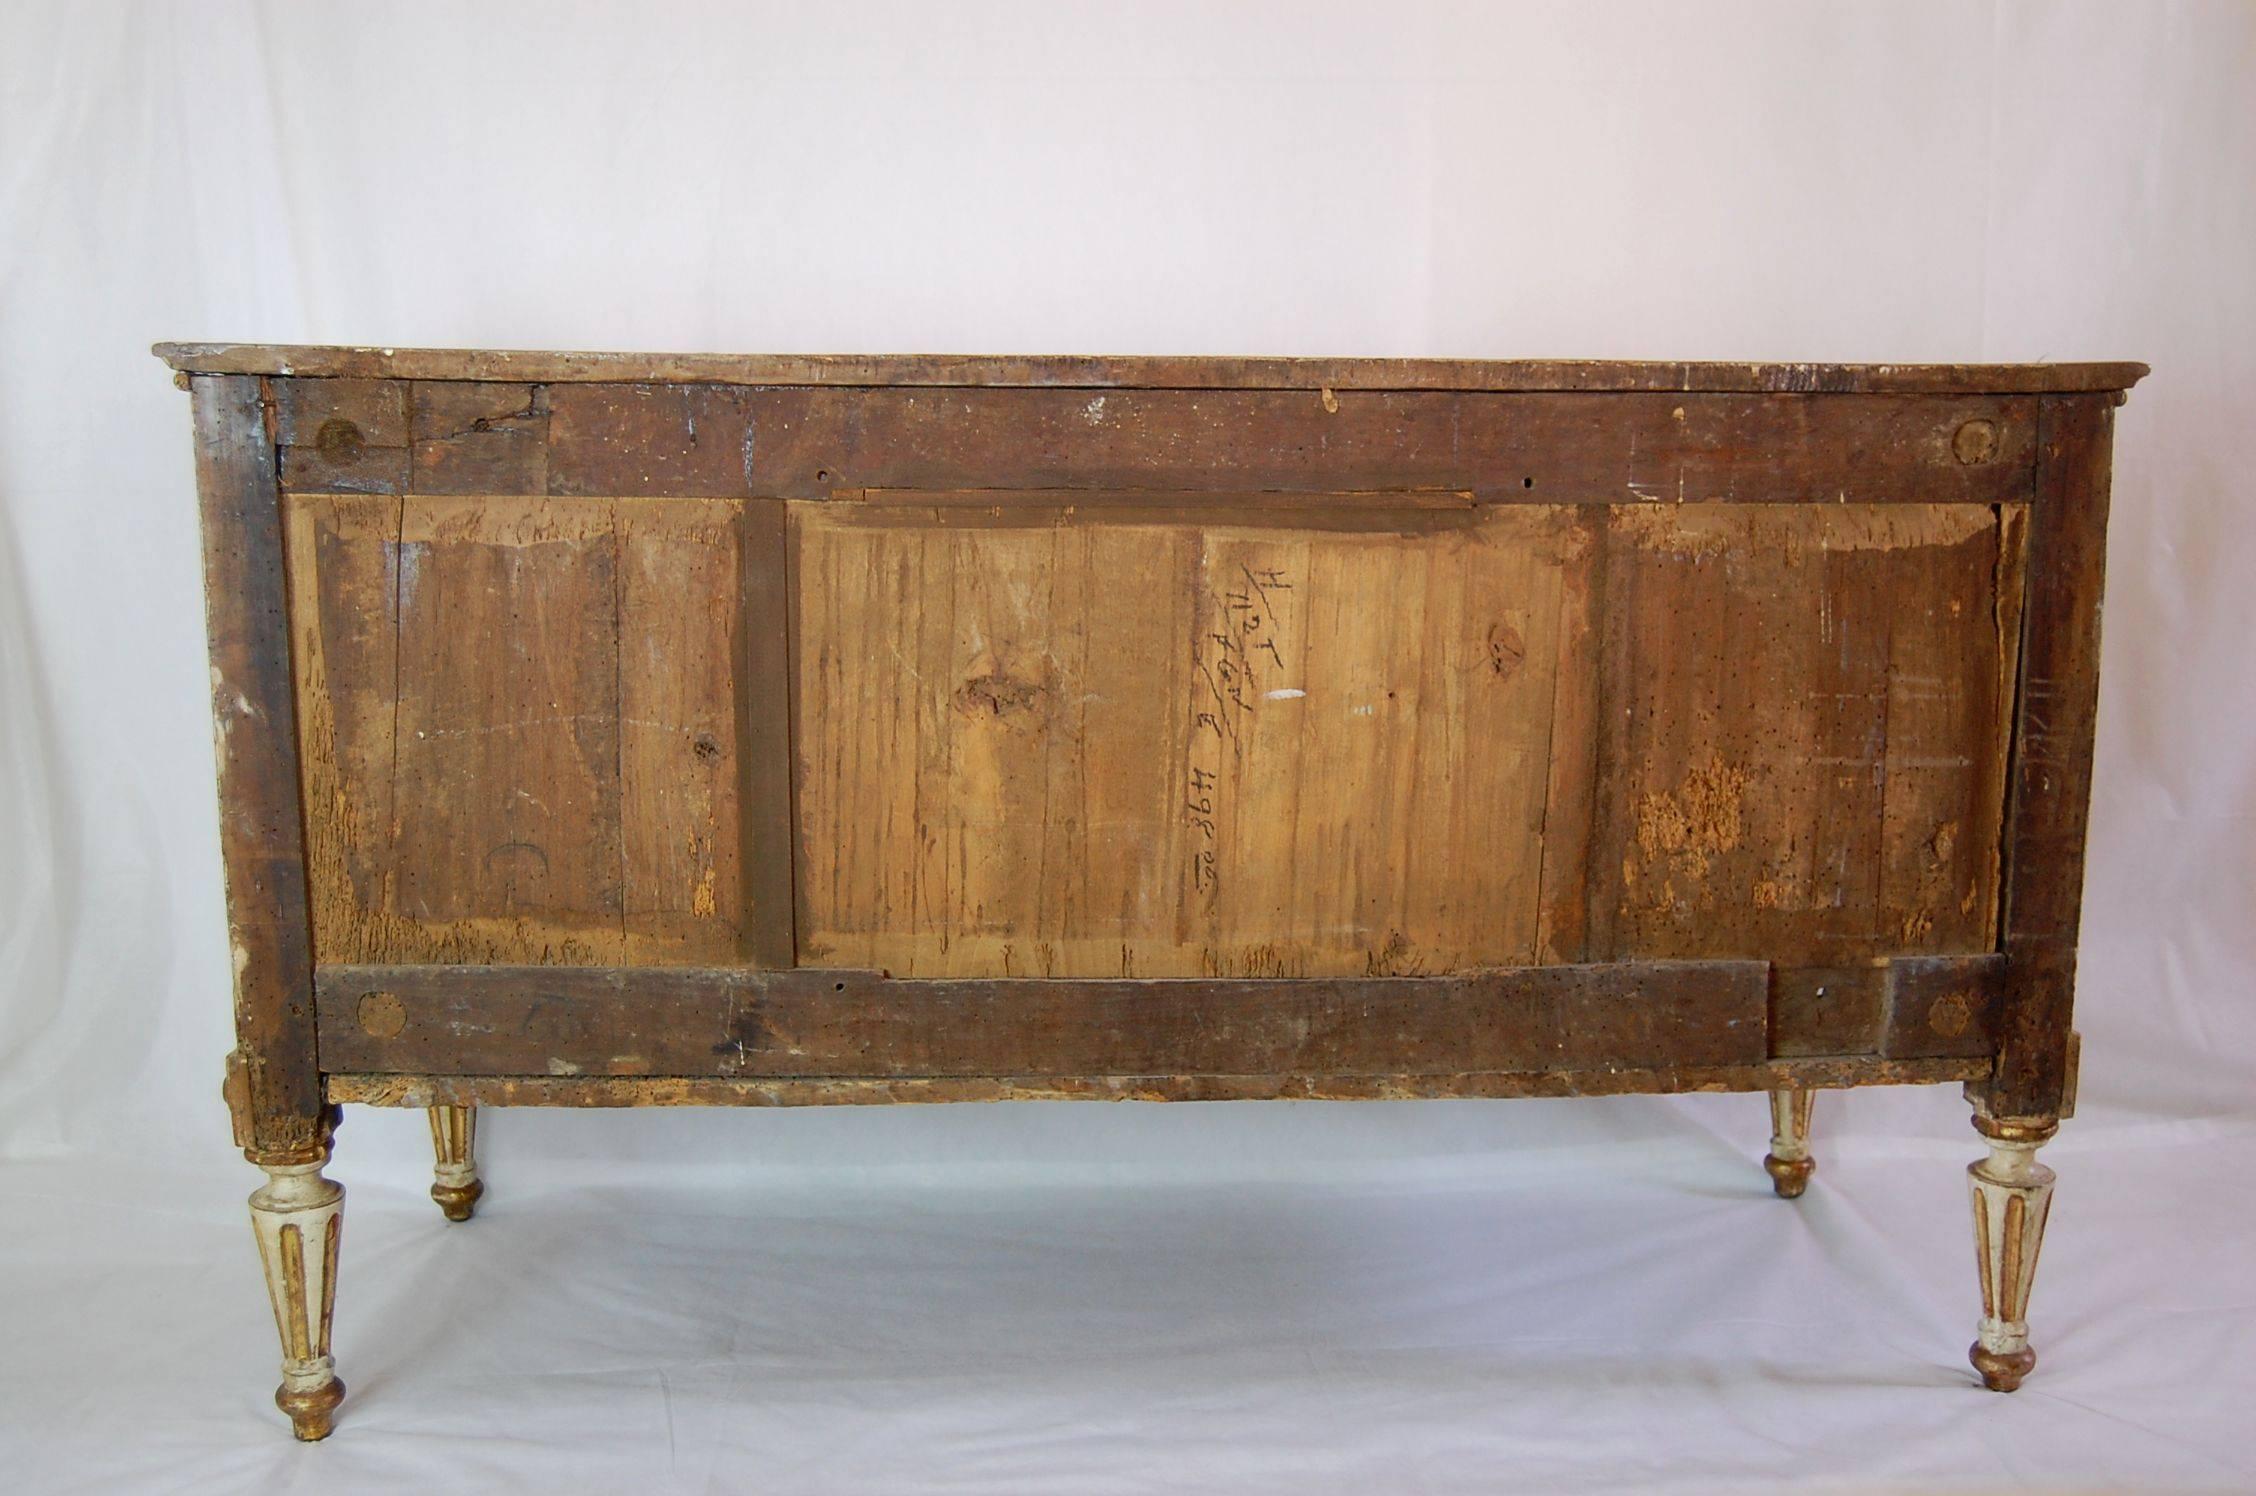 Antique Italian Painted Chest in Original Painted Finish, circa 1800 In Good Condition For Sale In Pittsburgh, PA